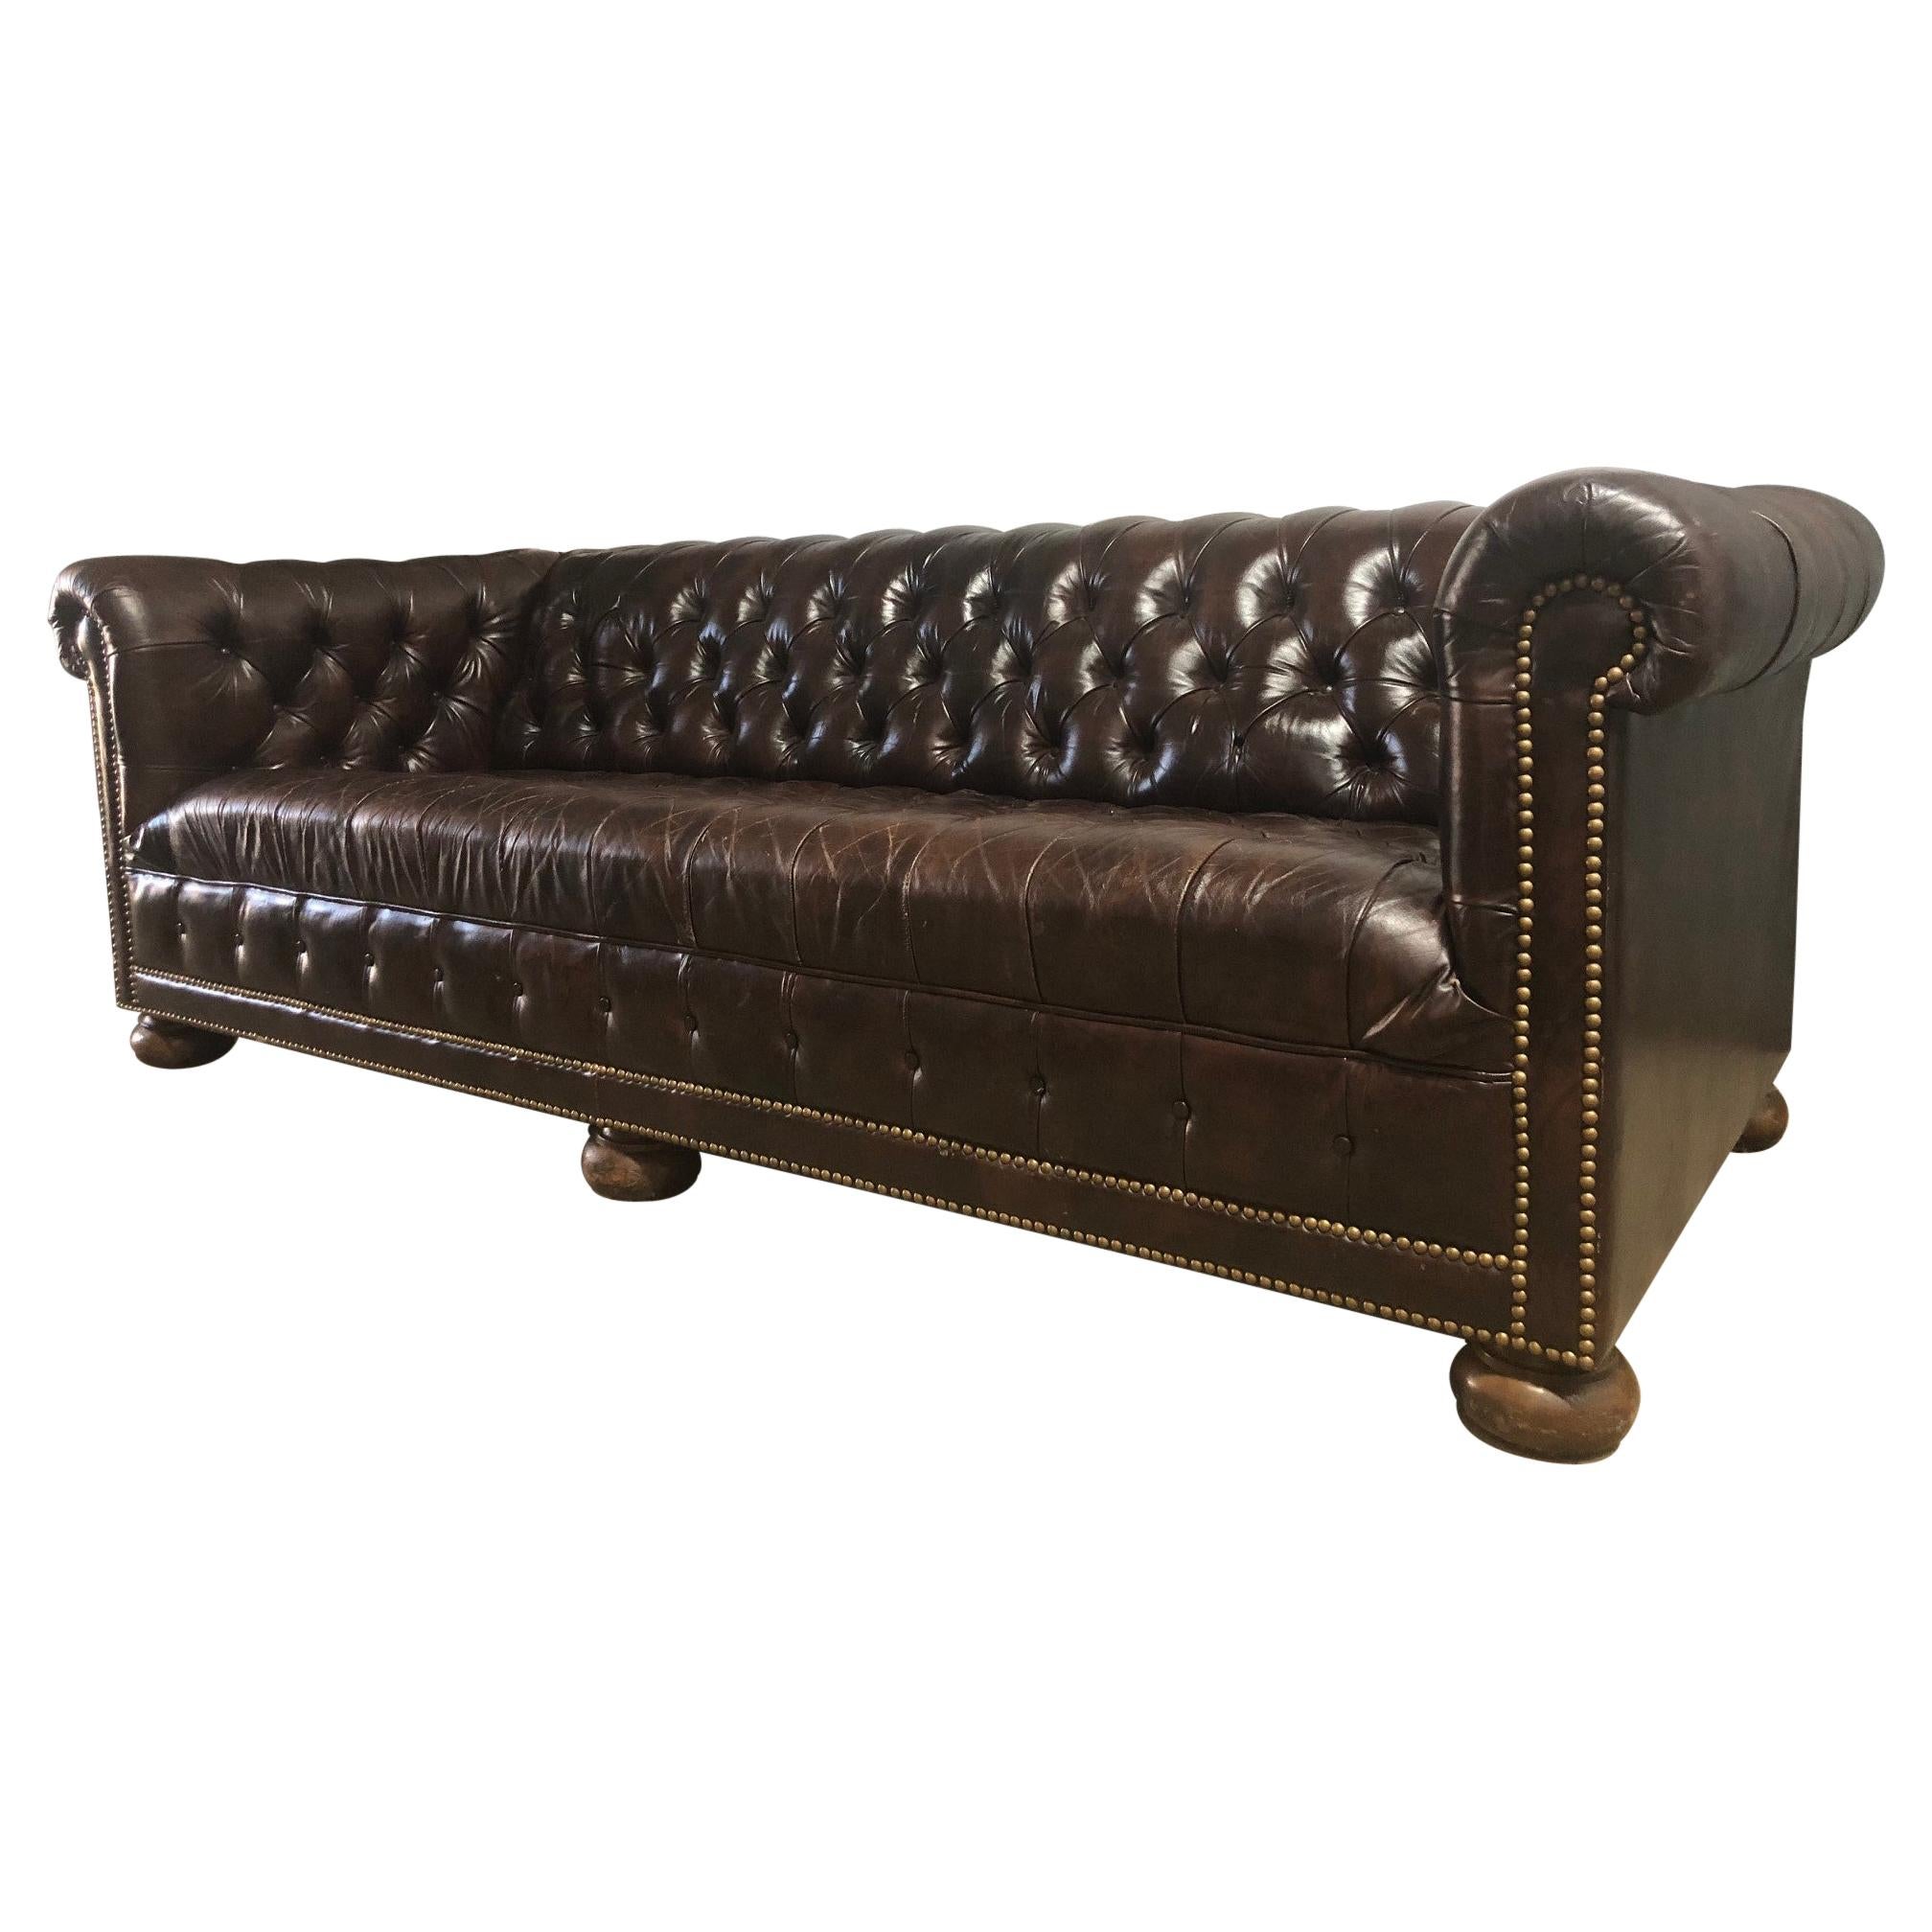 Vintage Leather Chesterfield Sofa For Sale at 1stDibs